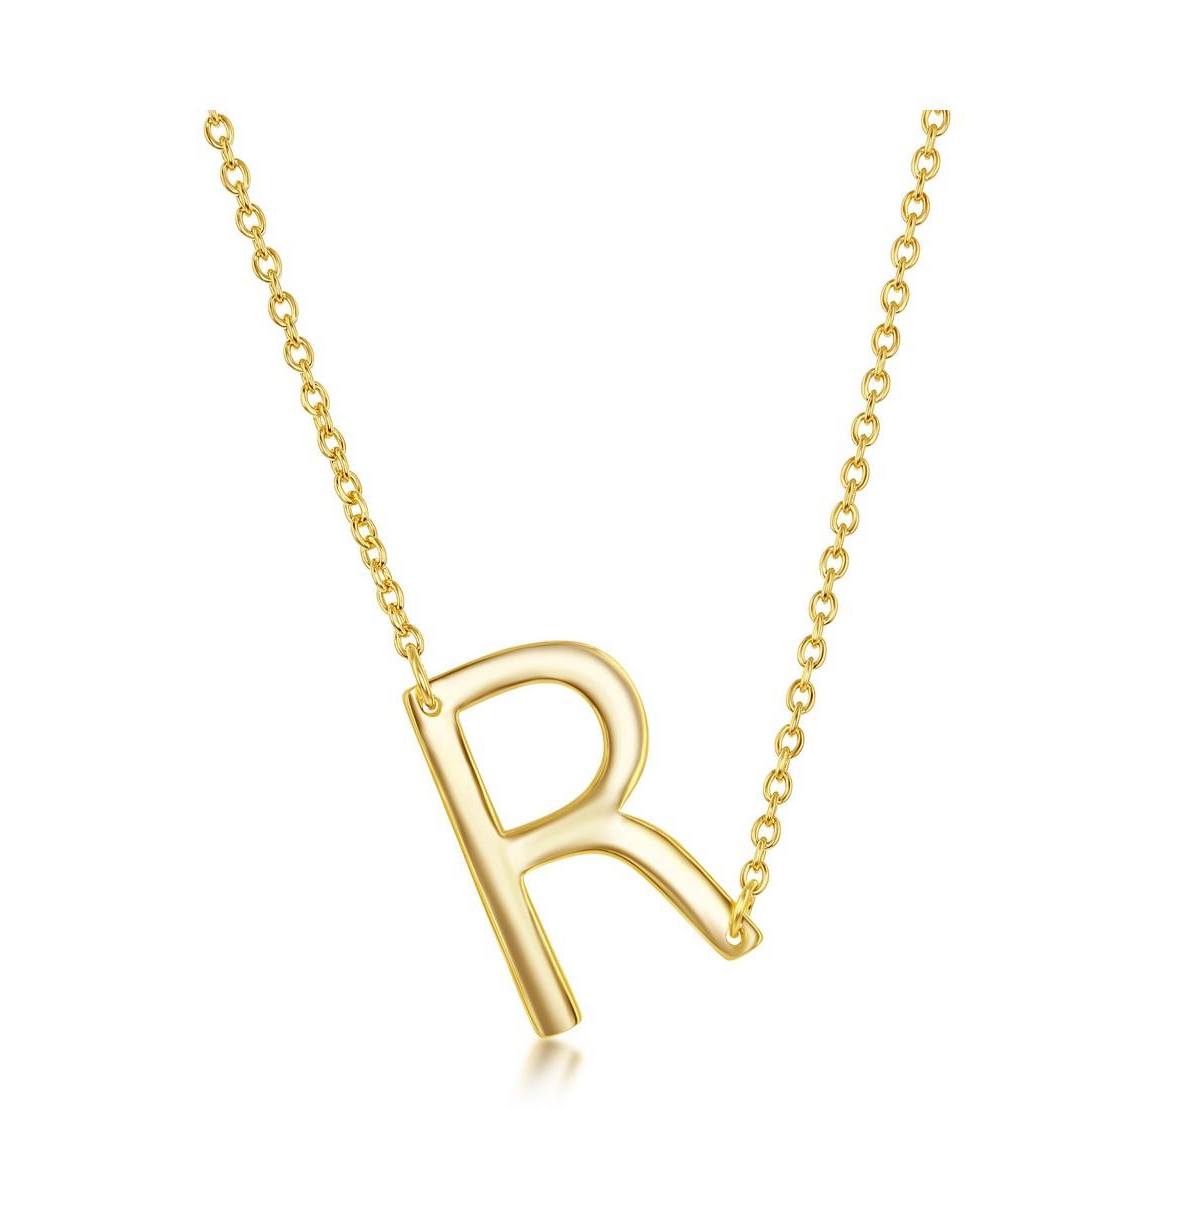 Gold Tone Sideways Initial Necklace - Gold r